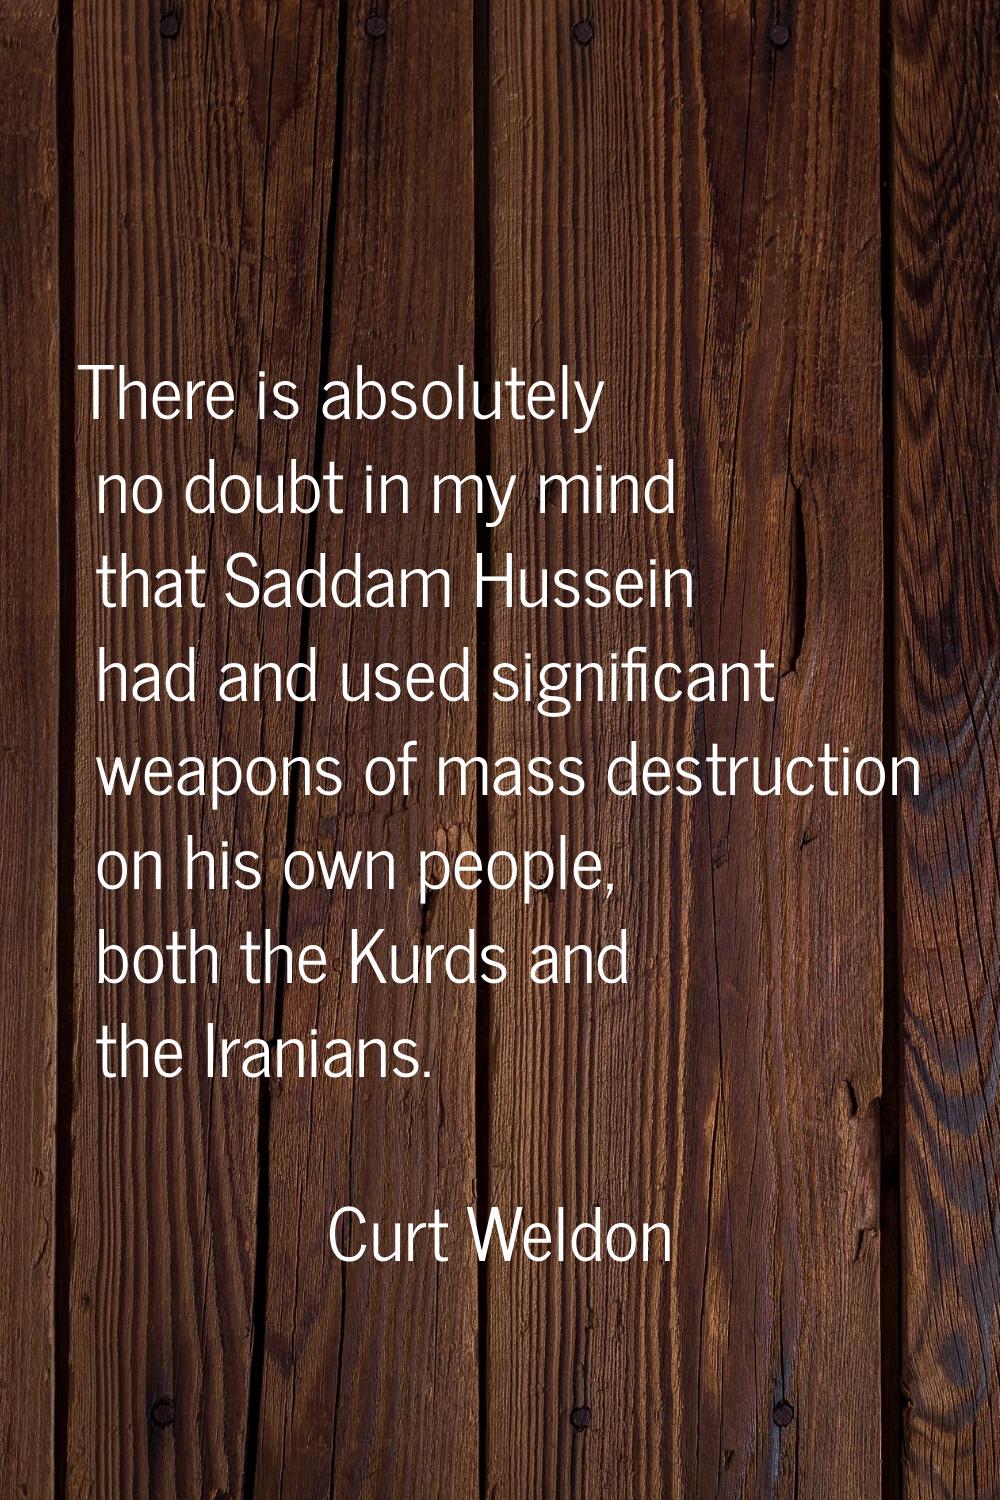 There is absolutely no doubt in my mind that Saddam Hussein had and used significant weapons of mas